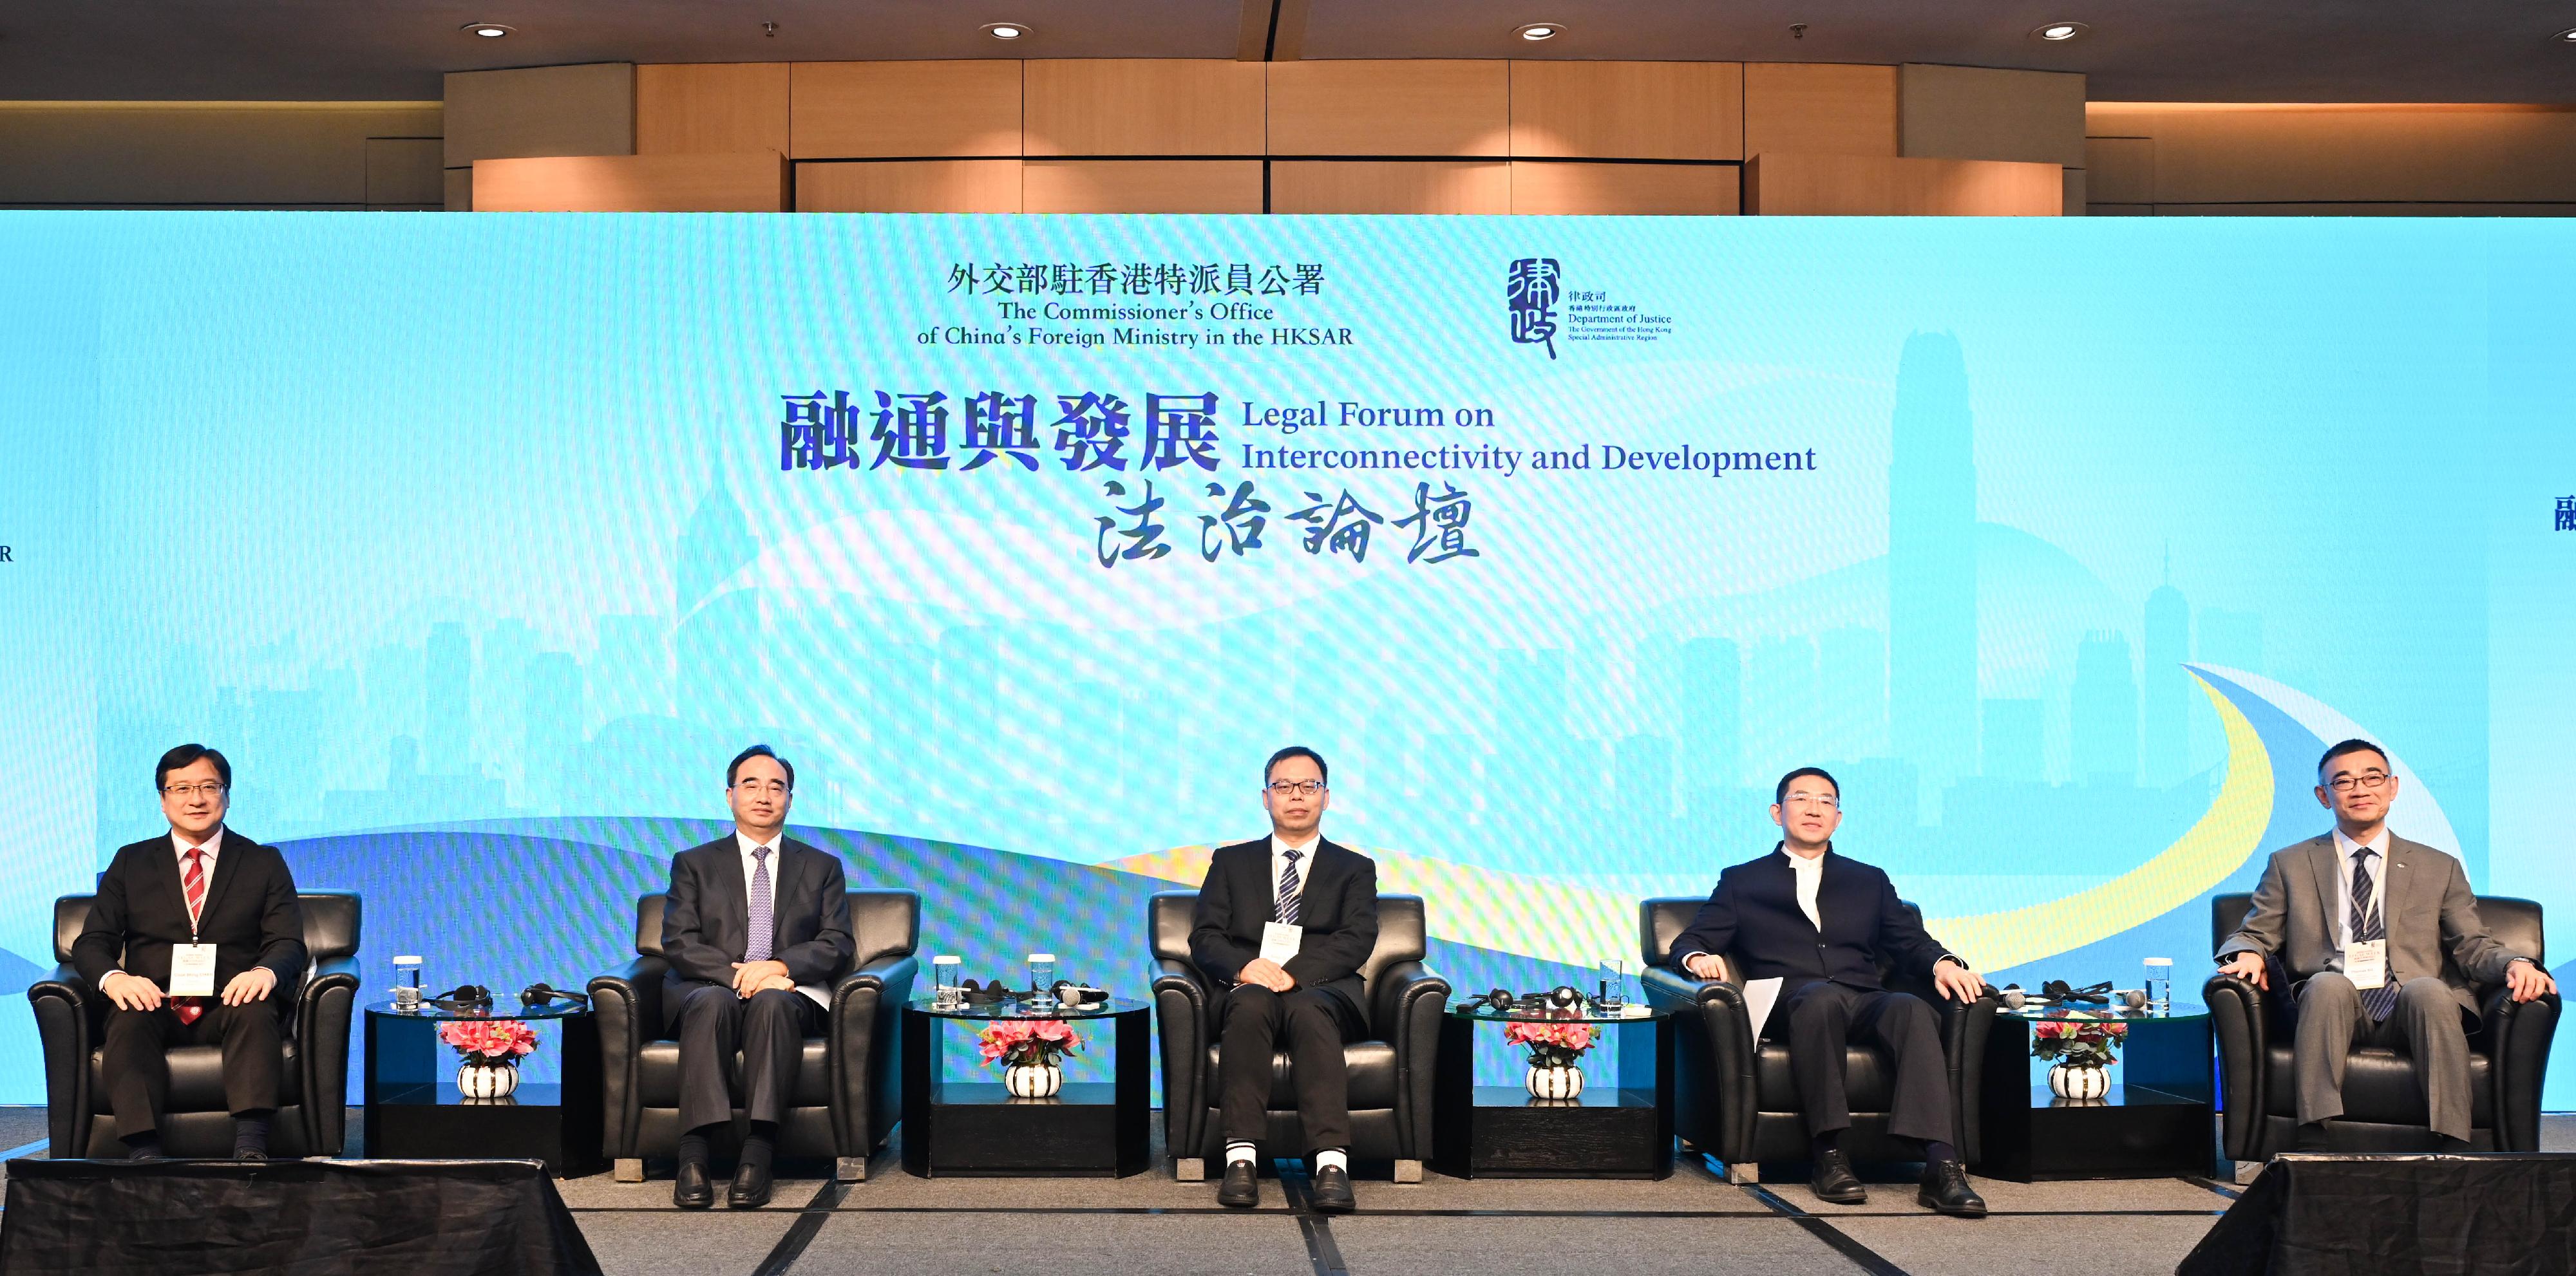 As part of the Hong Kong Legal Week 2023, the Legal Forum on Interconnectivity and Development co-organised by the Office of the Commissioner of the Ministry of Foreign Affairs in the Hong Kong Special Administrative Region and the Department of Justice was held successfully today (November 7). Photo shows (from left) the President of the Law Society of Hong Kong, Mr Chan Chak-ming; the President of the Chinese Society of International Law, Professor Huang Jin; Deputy Dean of Wuhan University Academy of International Law and Global Governance Professor Qi Tong; the Director-General of the International Organization for Mediation Preparatory Office, Dr Sun Jin; and the Chairman of the eBRAM International Online Dispute Resolution Centre, Dr Thomas So, at panel session 1 on legal safeguards for high-quality development under the Belt and Road Initiative.

